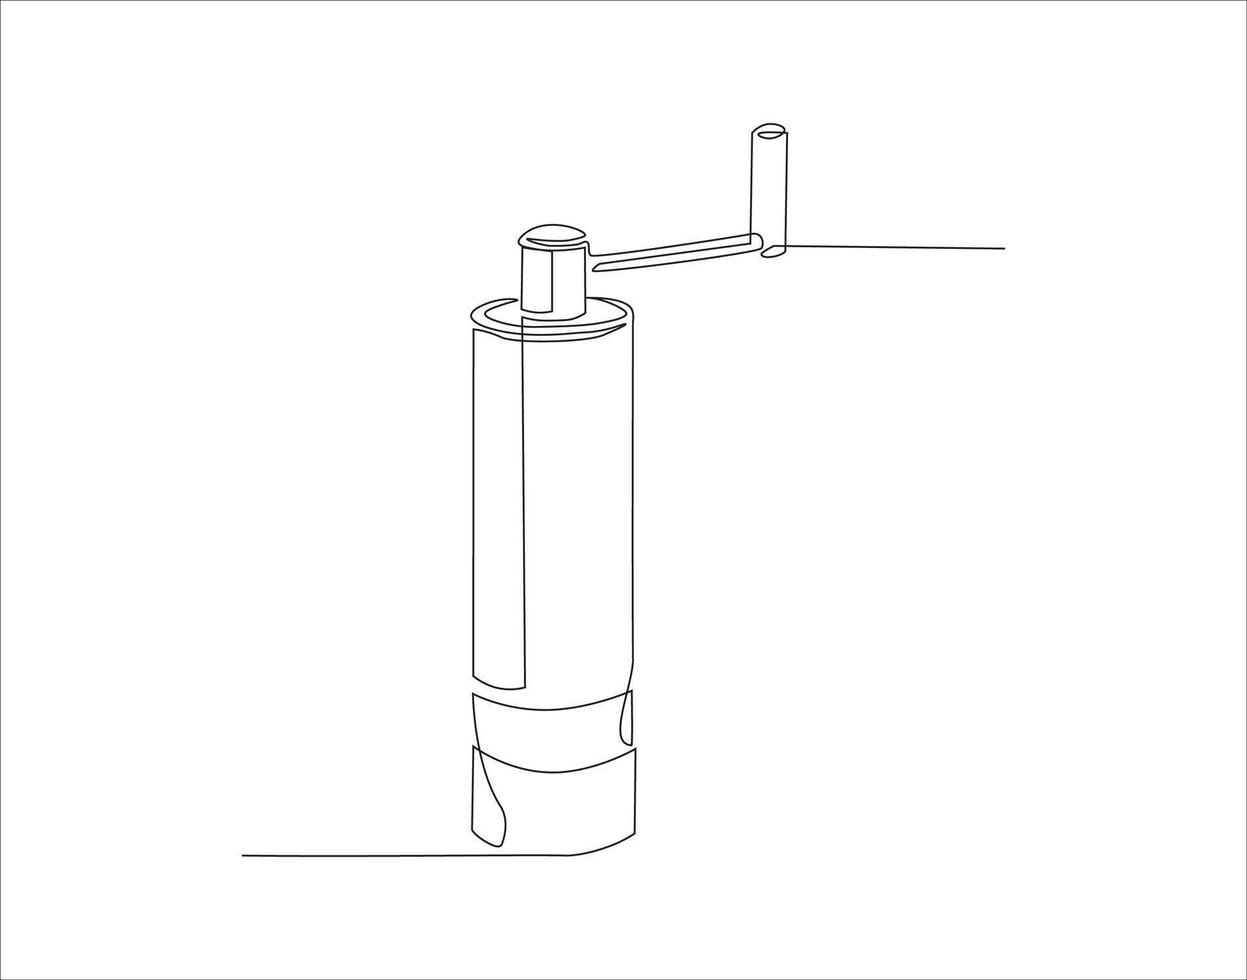 Continuous Line Drawing Of Manual Coffee Grinder. One Line Of Coffee Grinder. Grinder Continuous Line Art. Editable Outline. vector